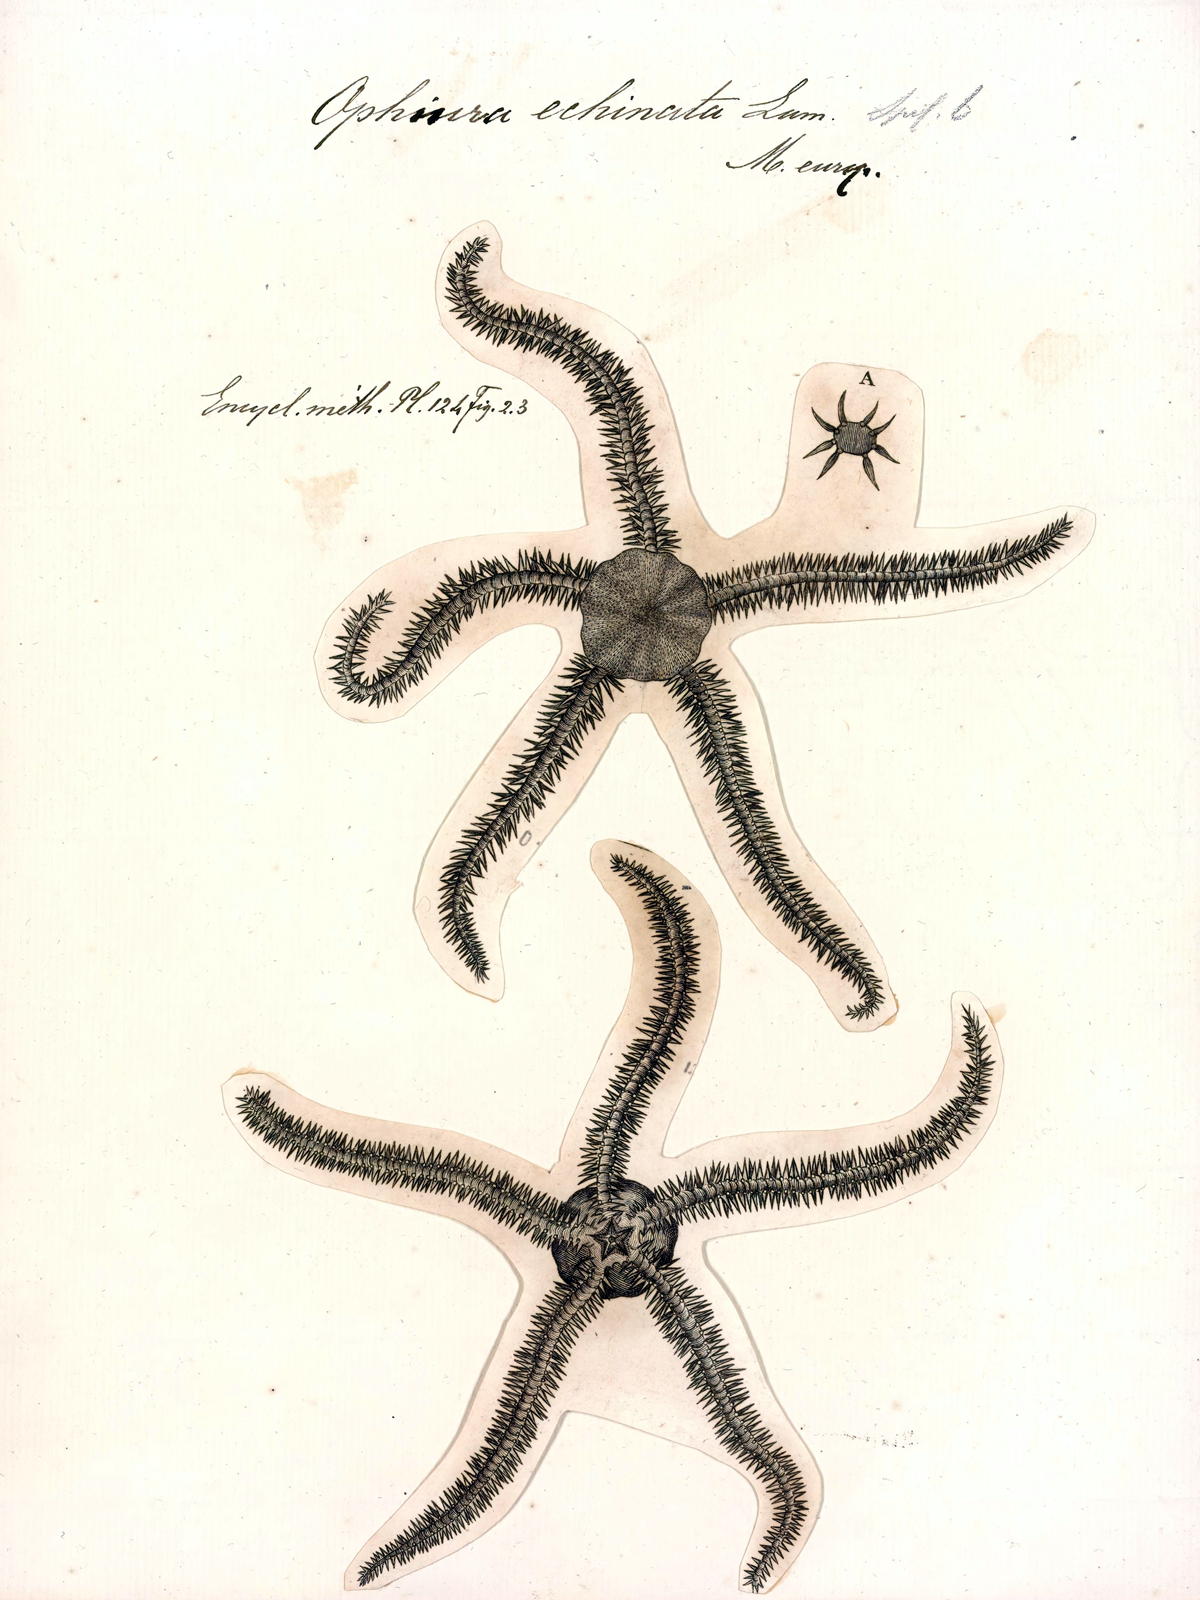 Illustration of two starfish against a white backdrop.